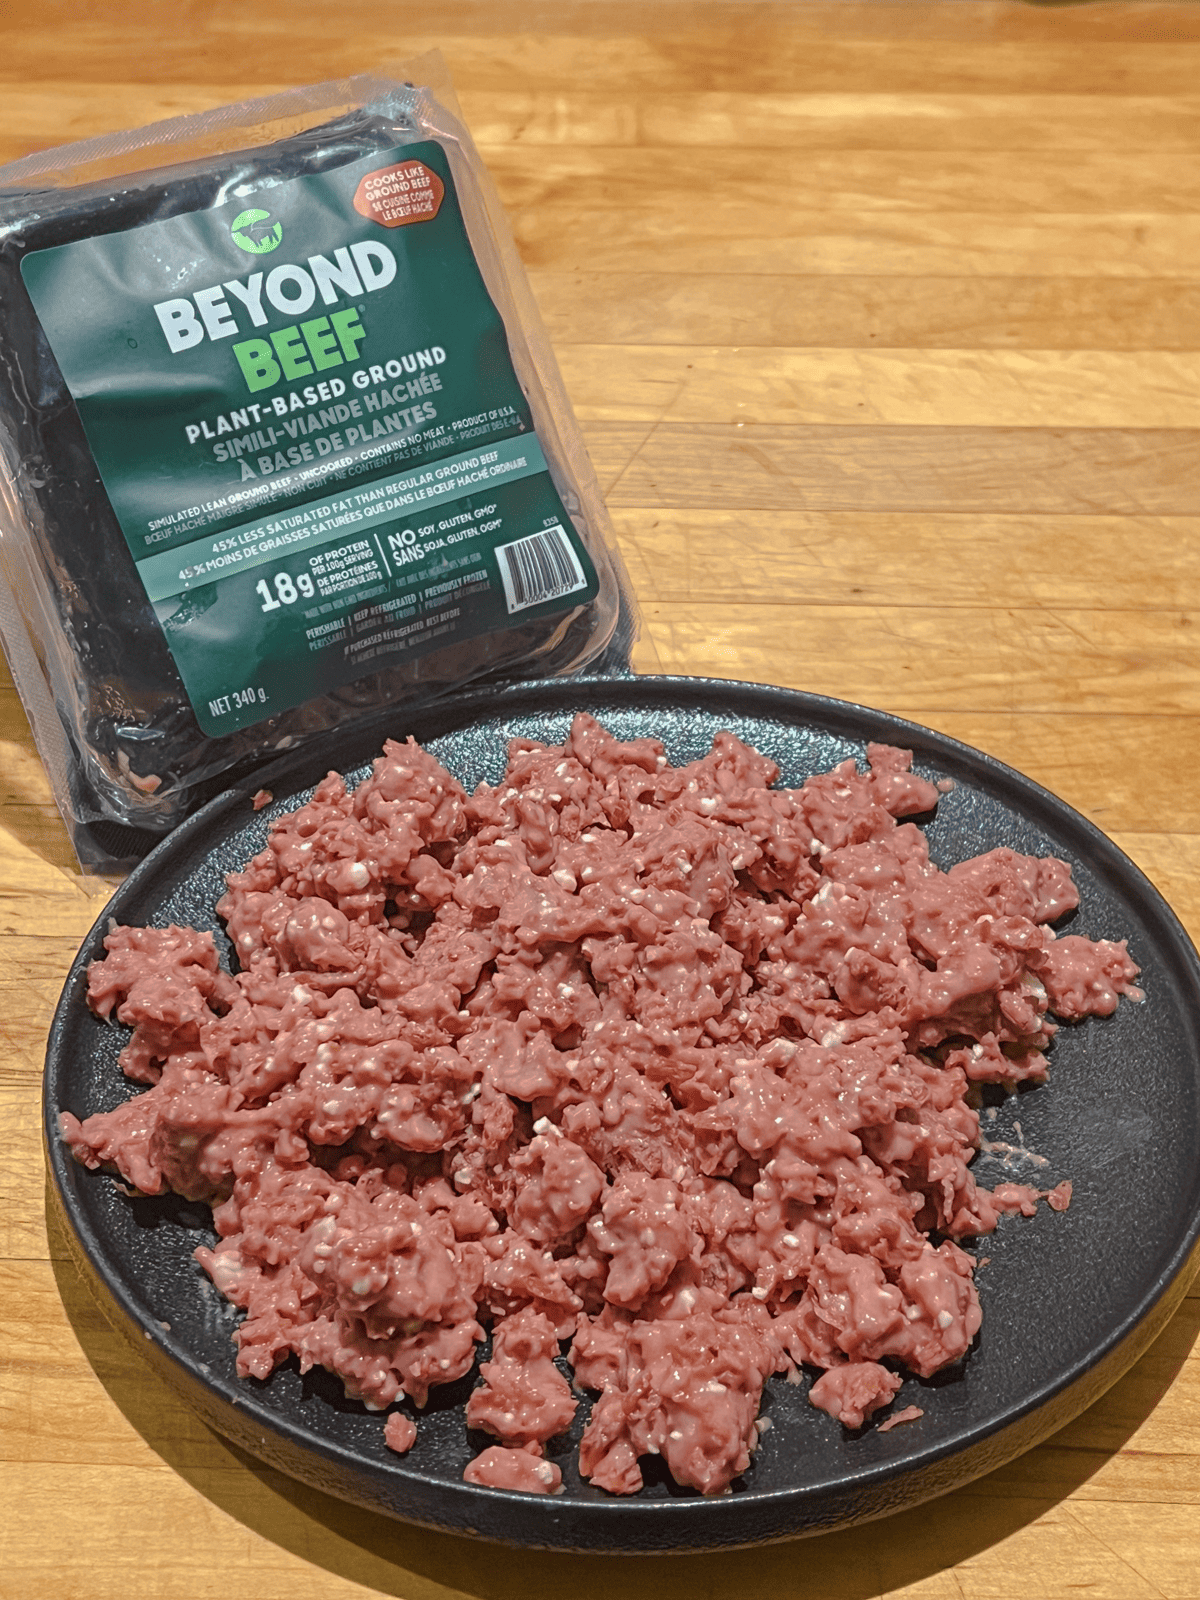 Beyond Beef package and contents on a black plate.